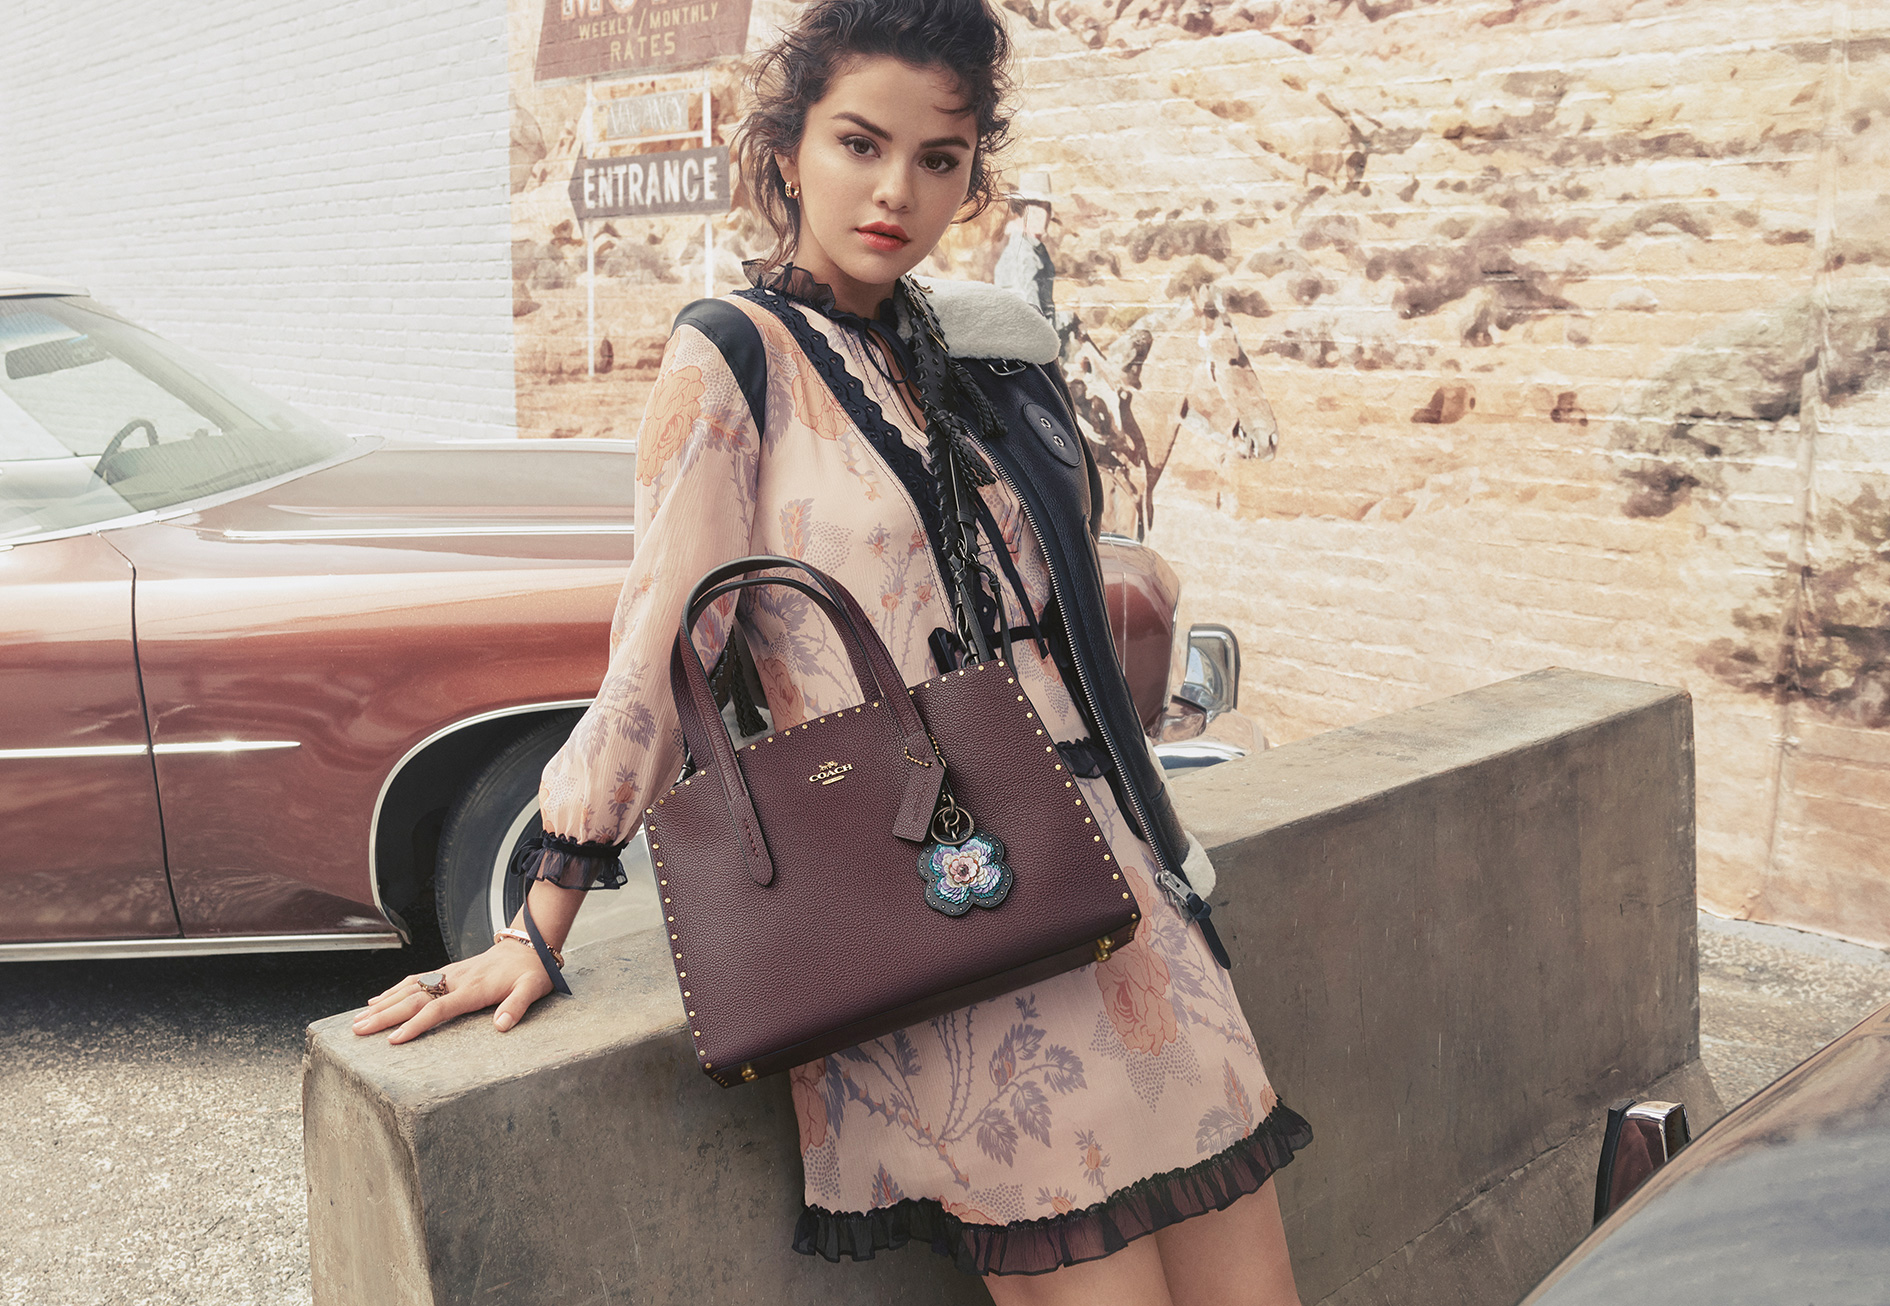 Selena Gomez X Coach Limited Edition Trial Bag For Sale In, 49% OFF